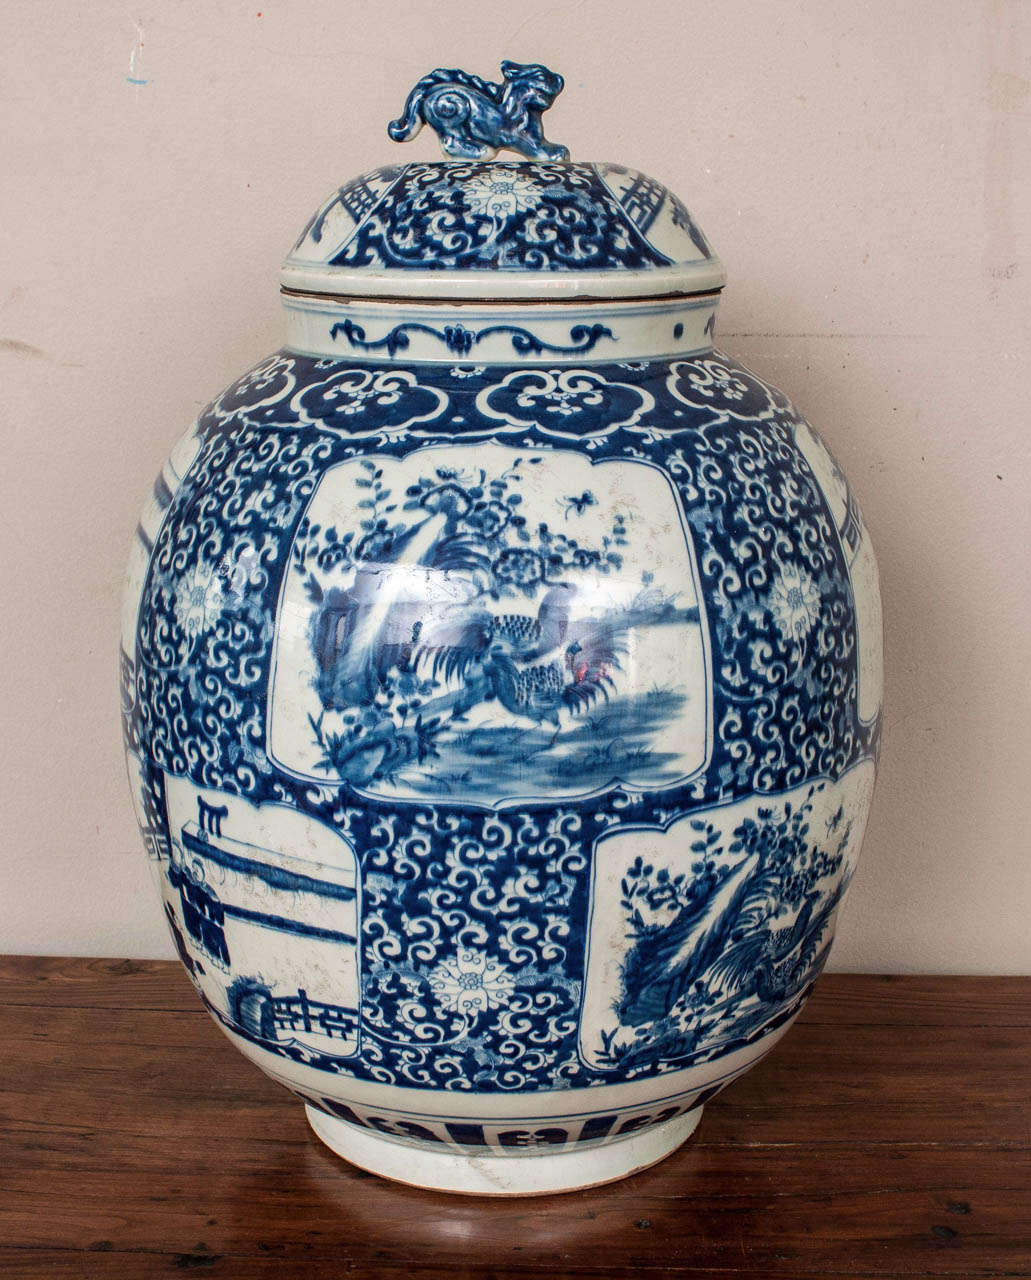 Striking pair of blue and white porcelain temple jars with lids portraying traditional landscape and figural scenes.